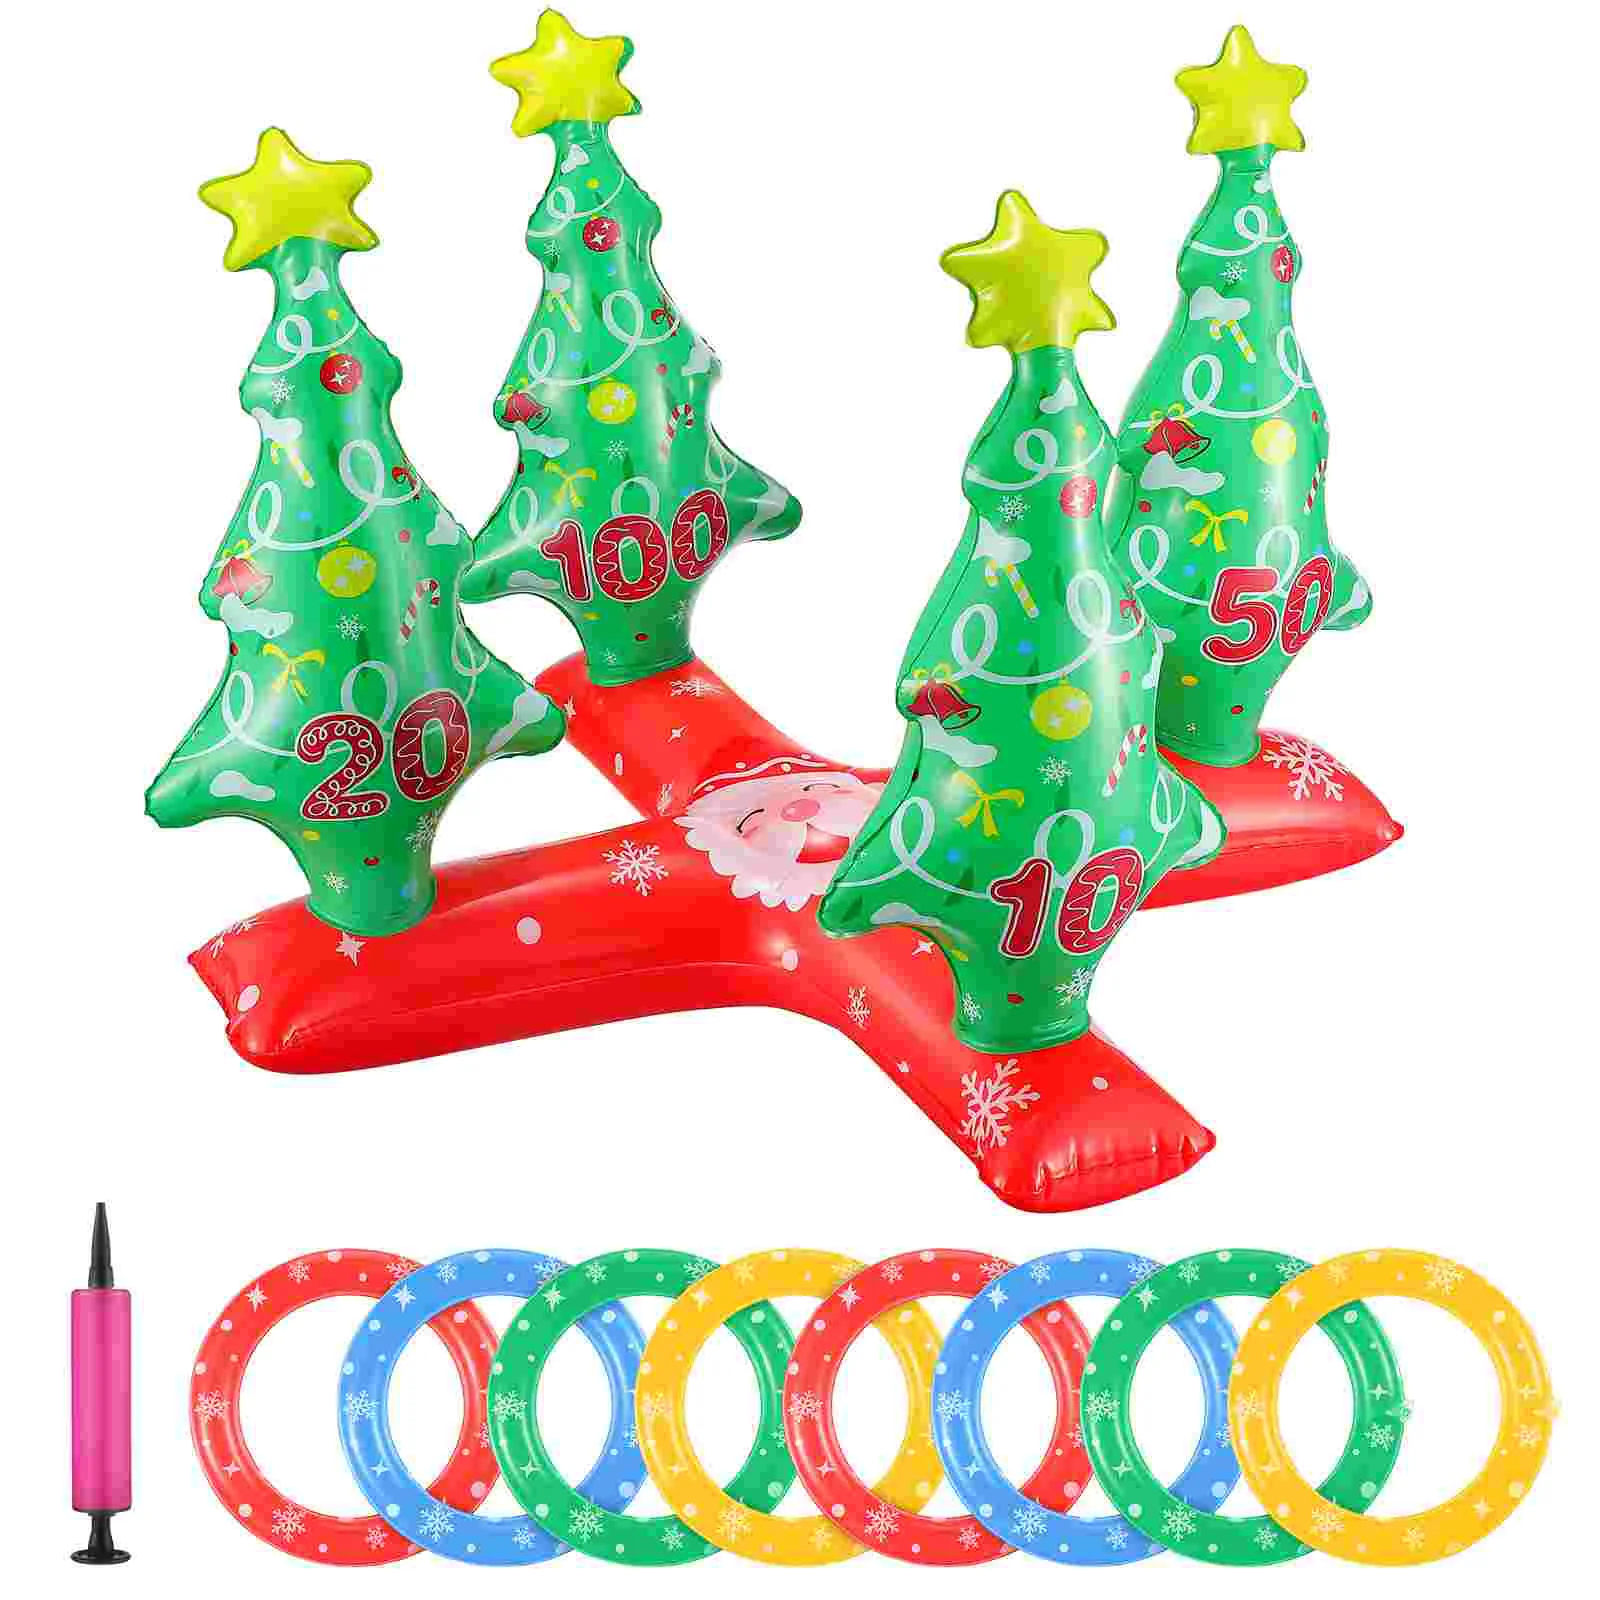 

Toss Christmas Ring Gameparty Supplies Inflatable Games Kids Outside Tree Set Rings Air Pump Throwing